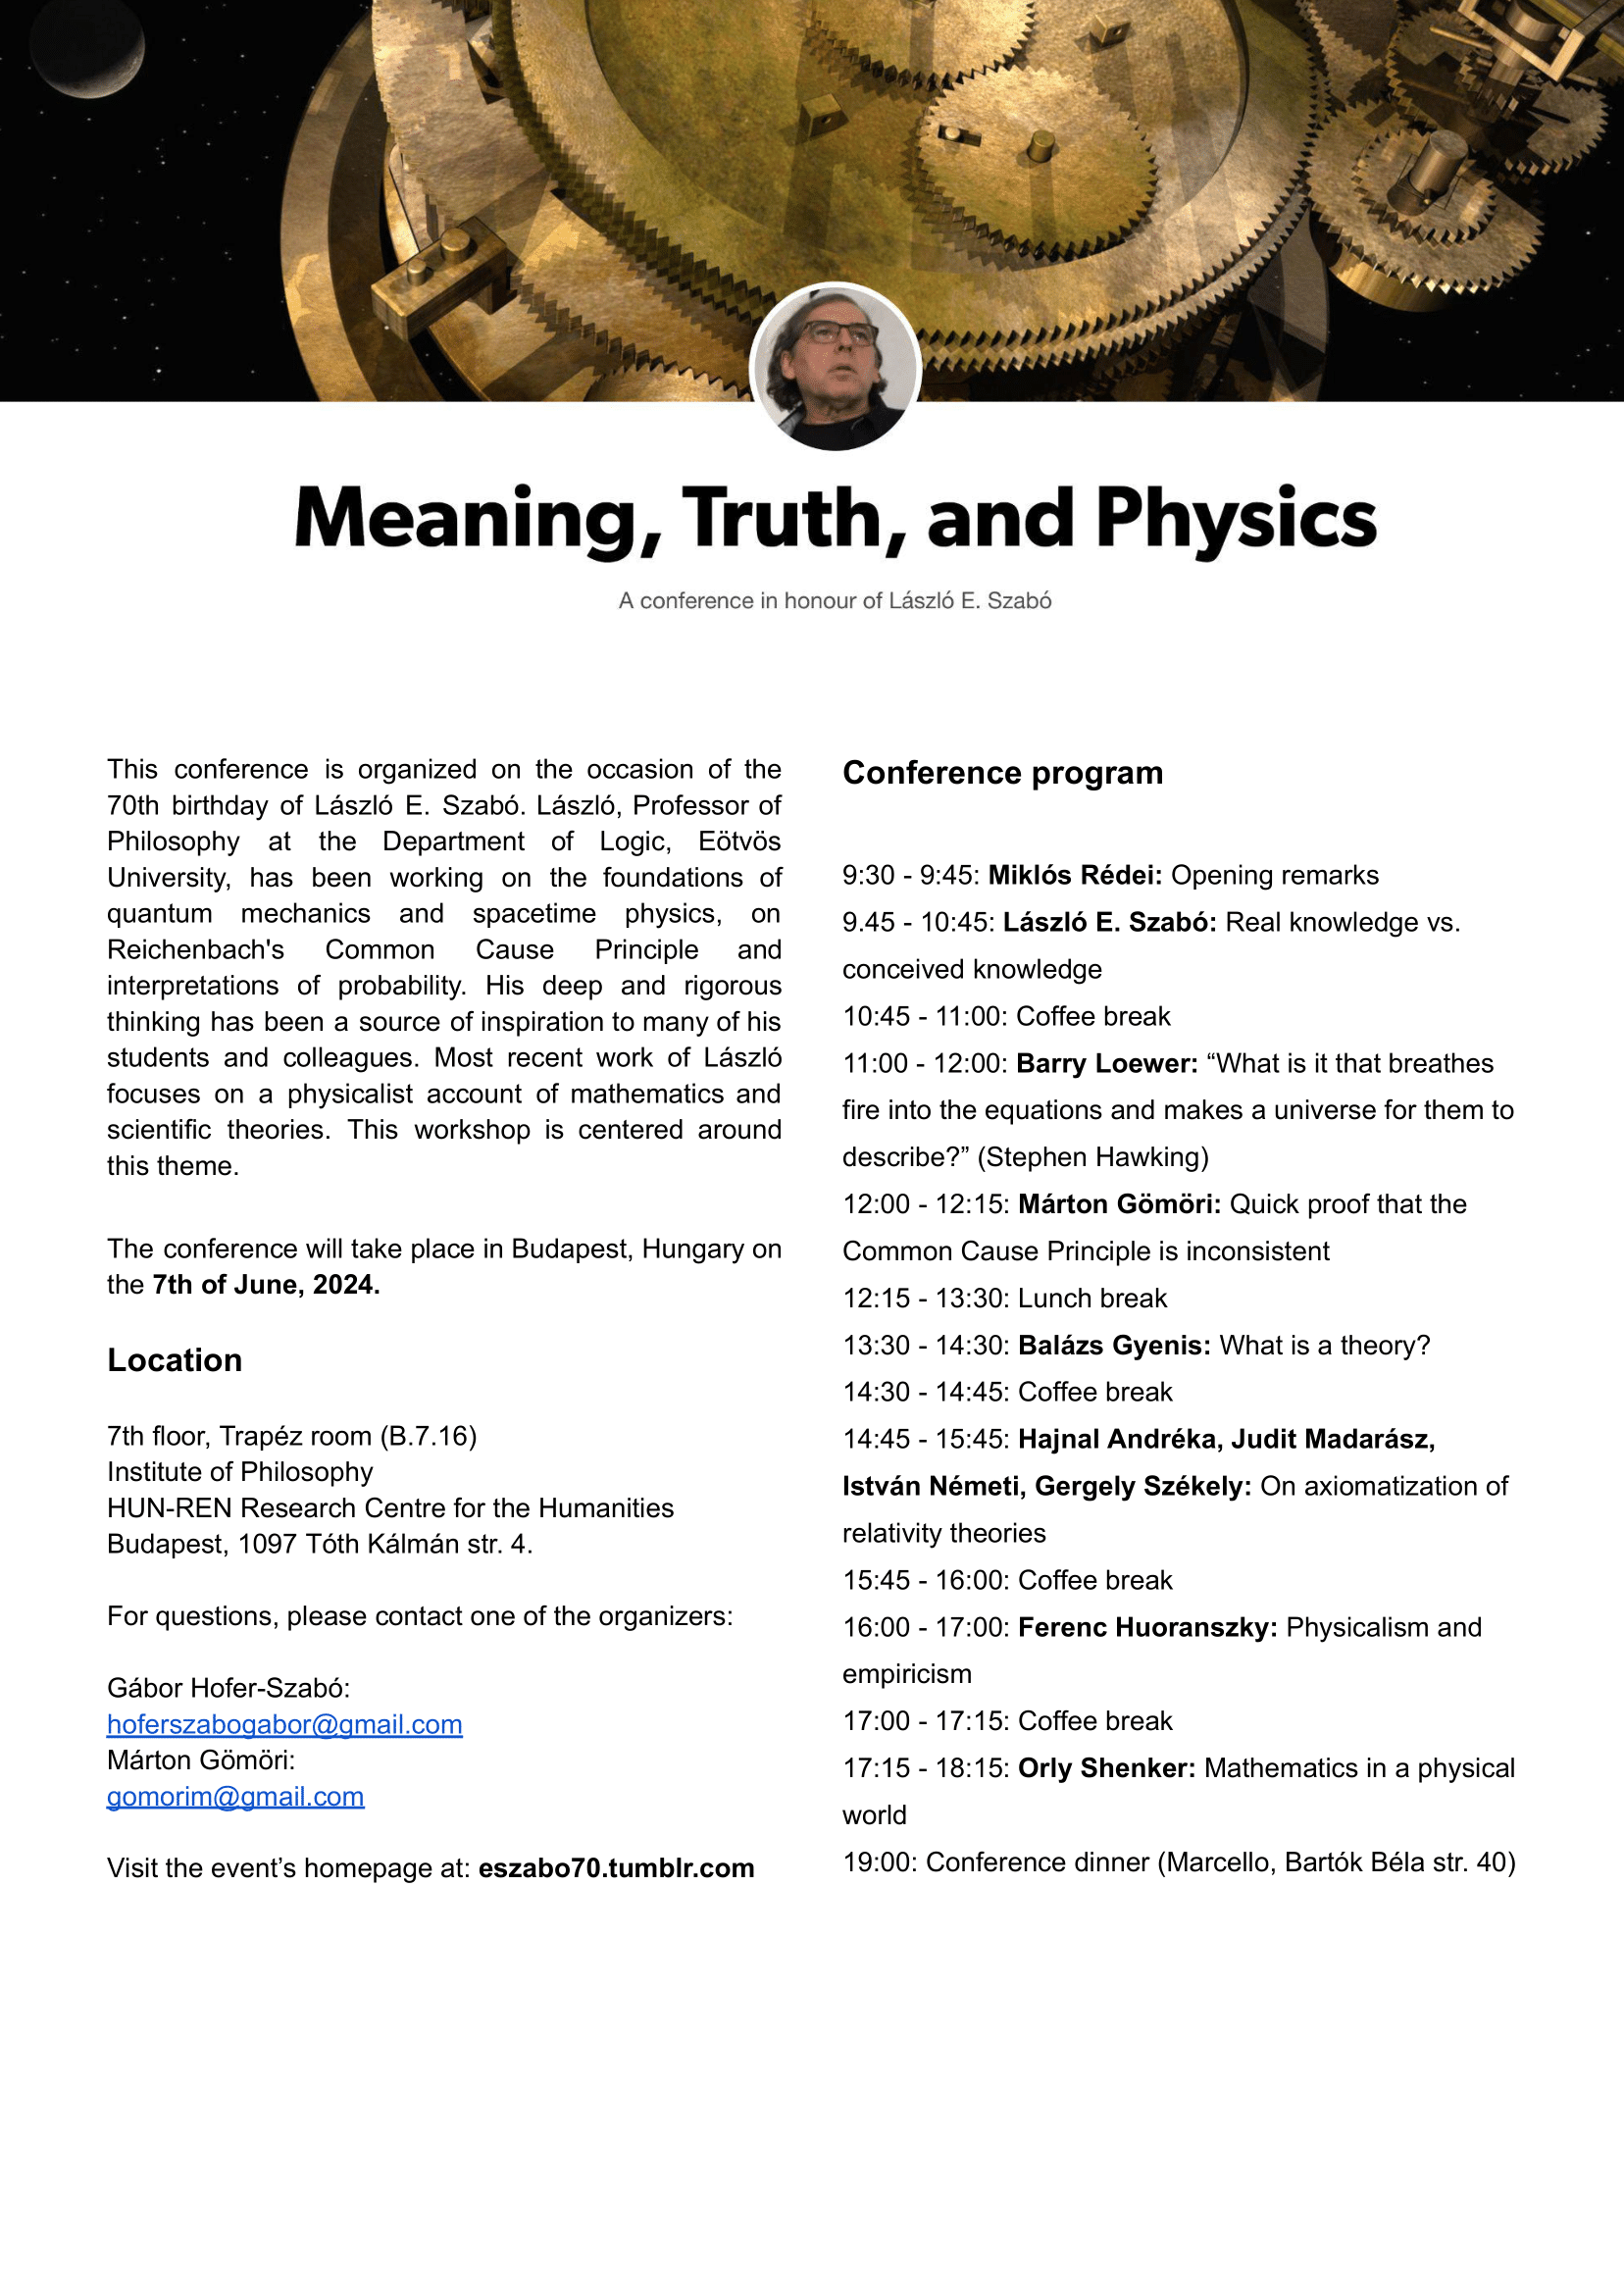 meaning_truth_physics_flyer_v2-1.png